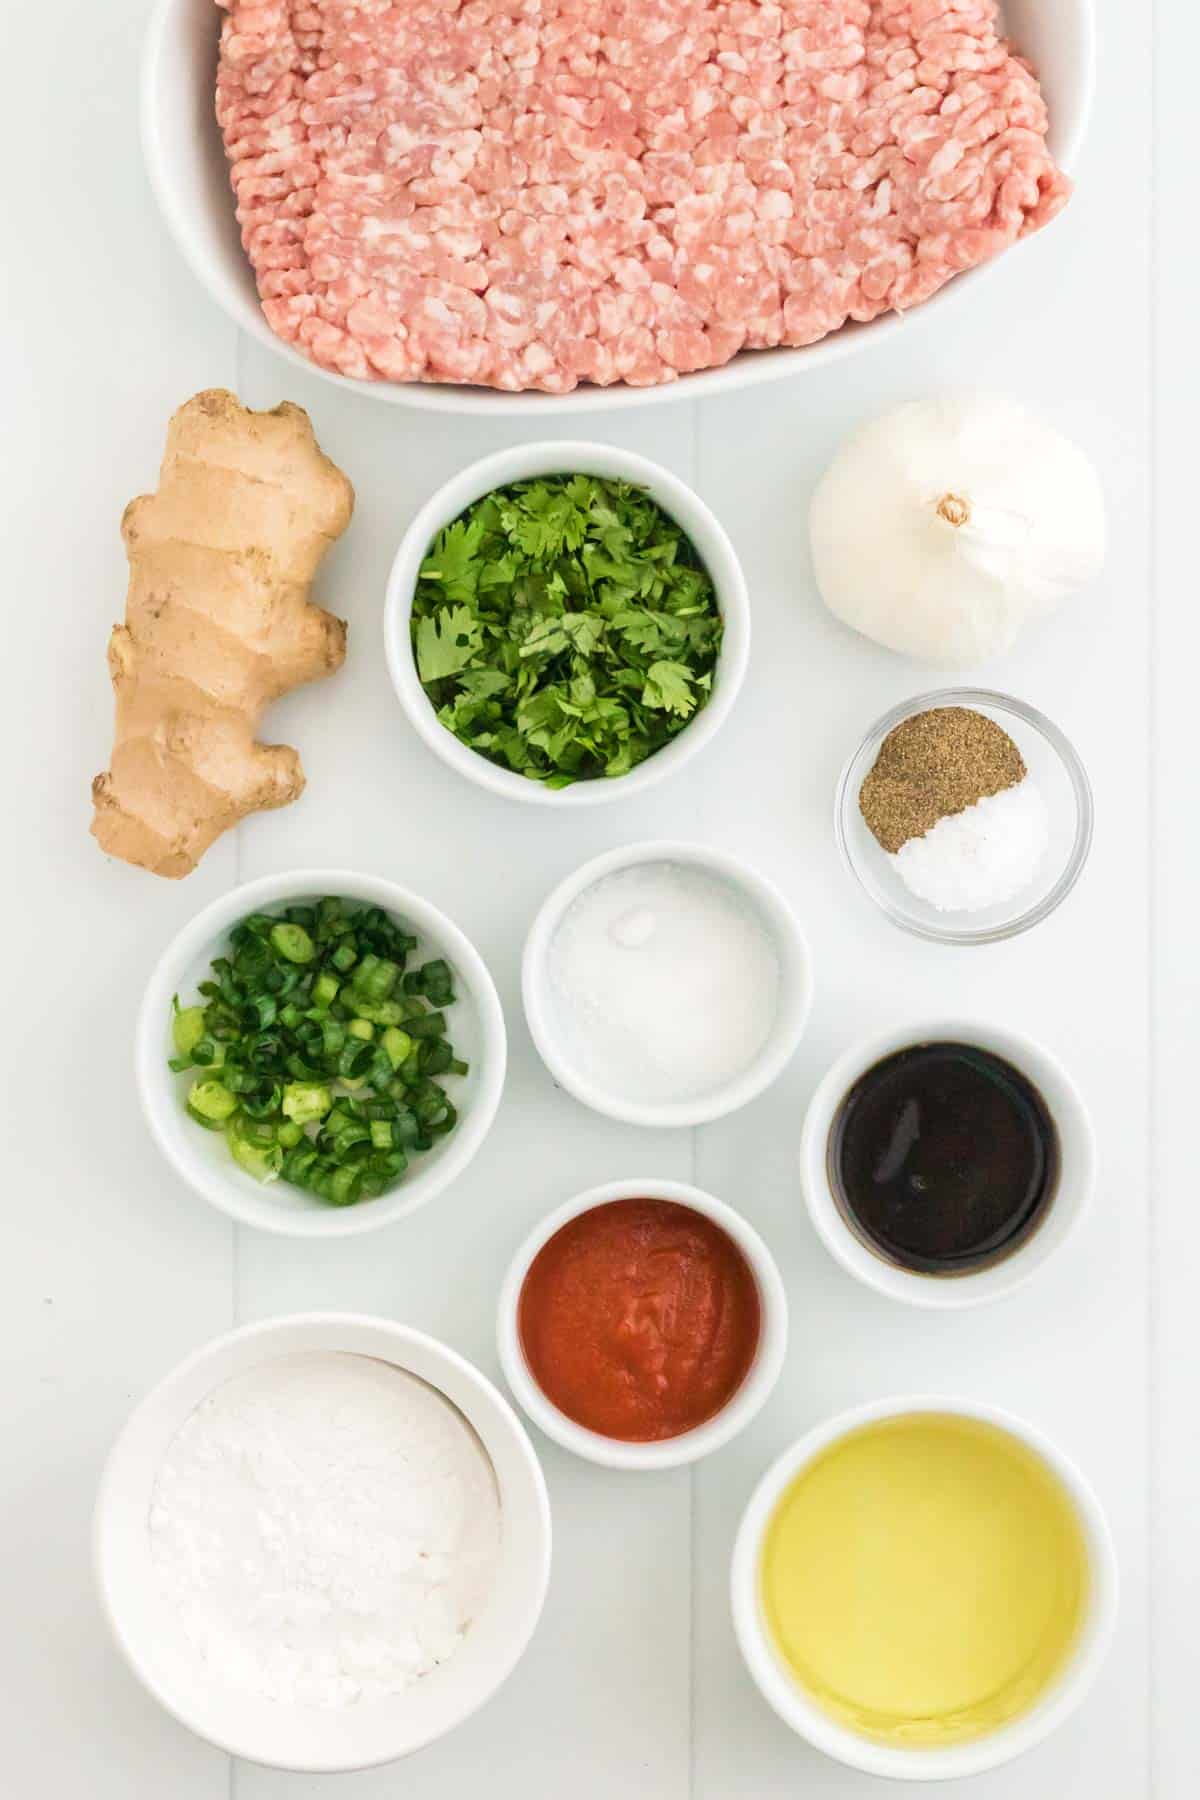 The ingredients for the pork meatballs laid out on a table in bowls and ramekins